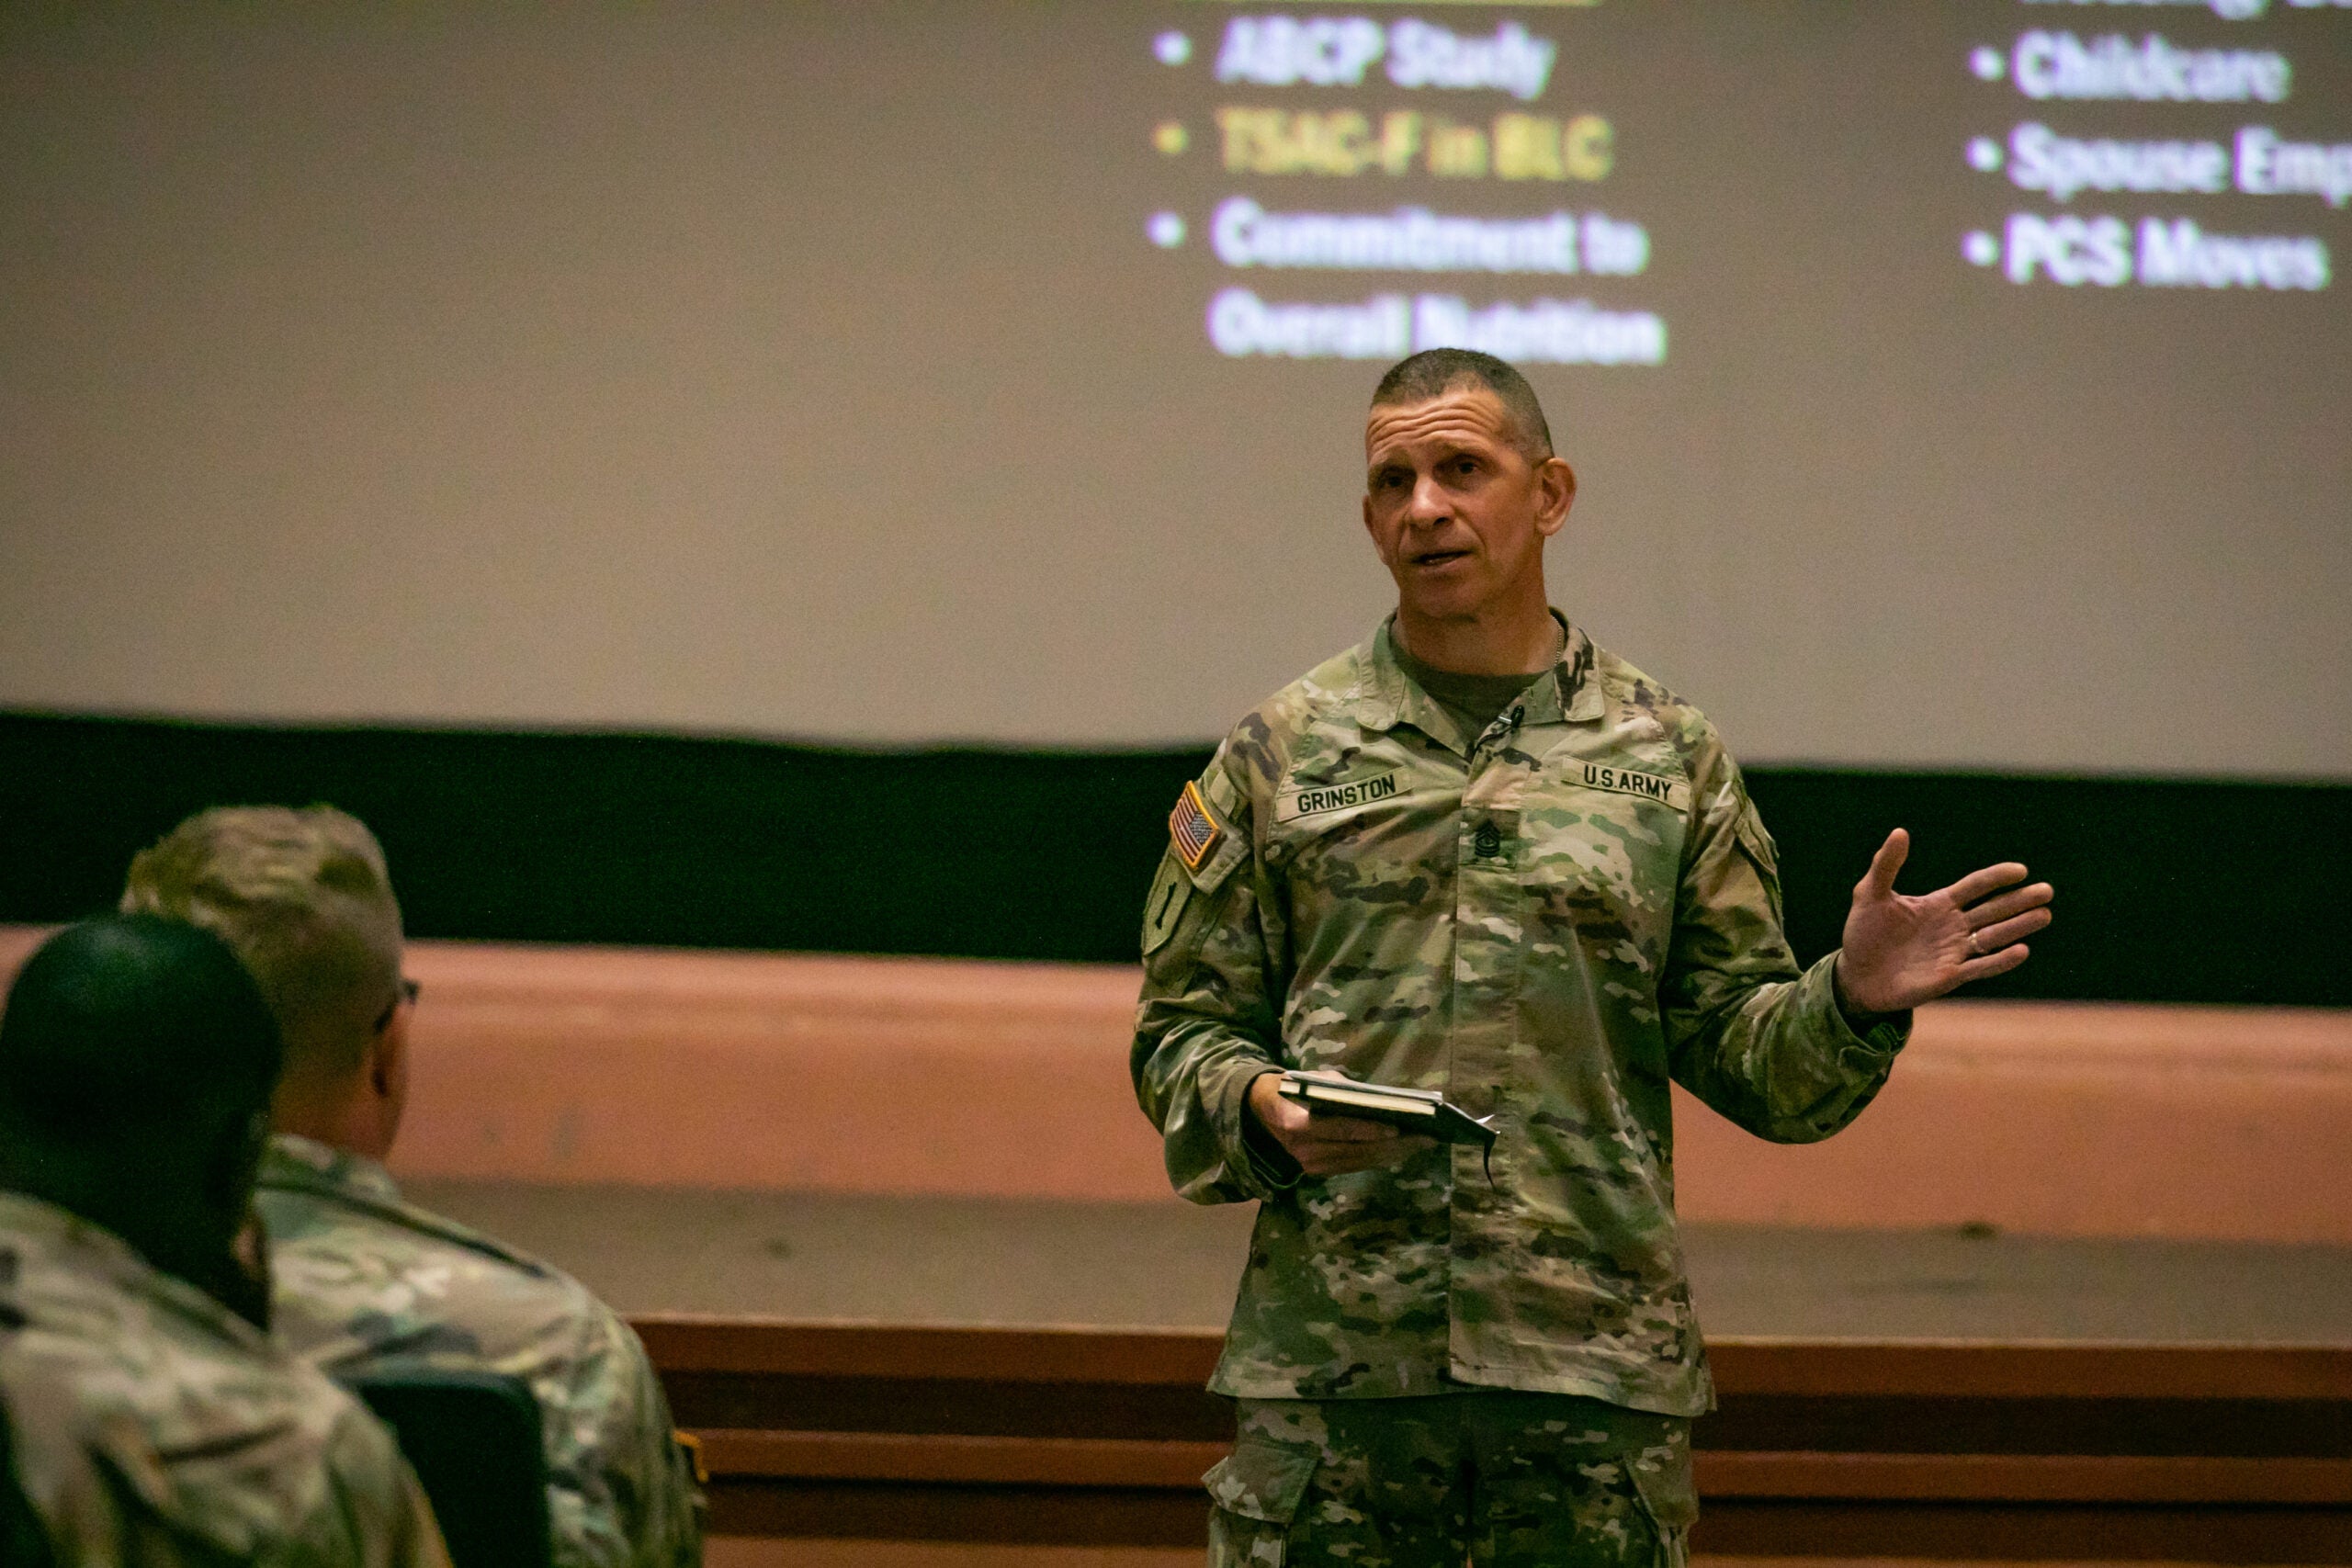 The Army is inviting social media influencers to DC to learn how to reach the youths